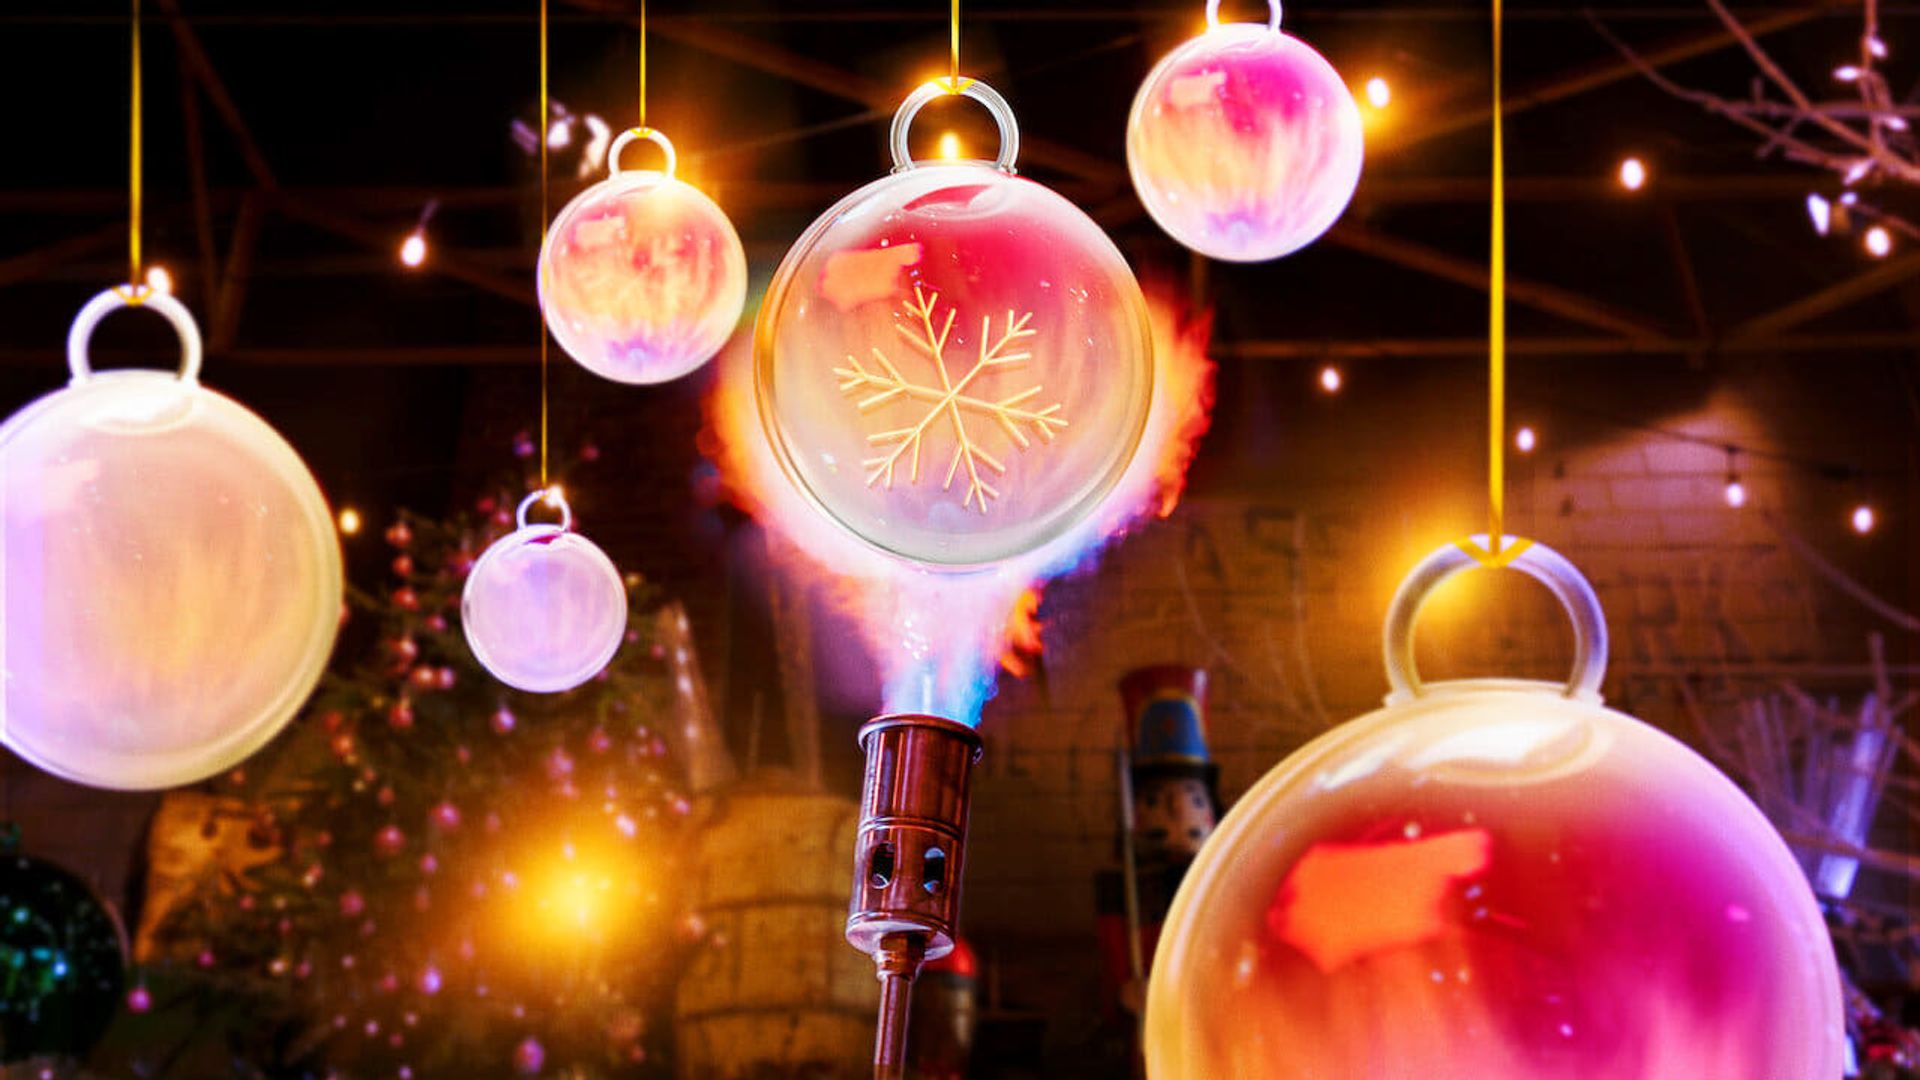 Blown Away: Christmas background